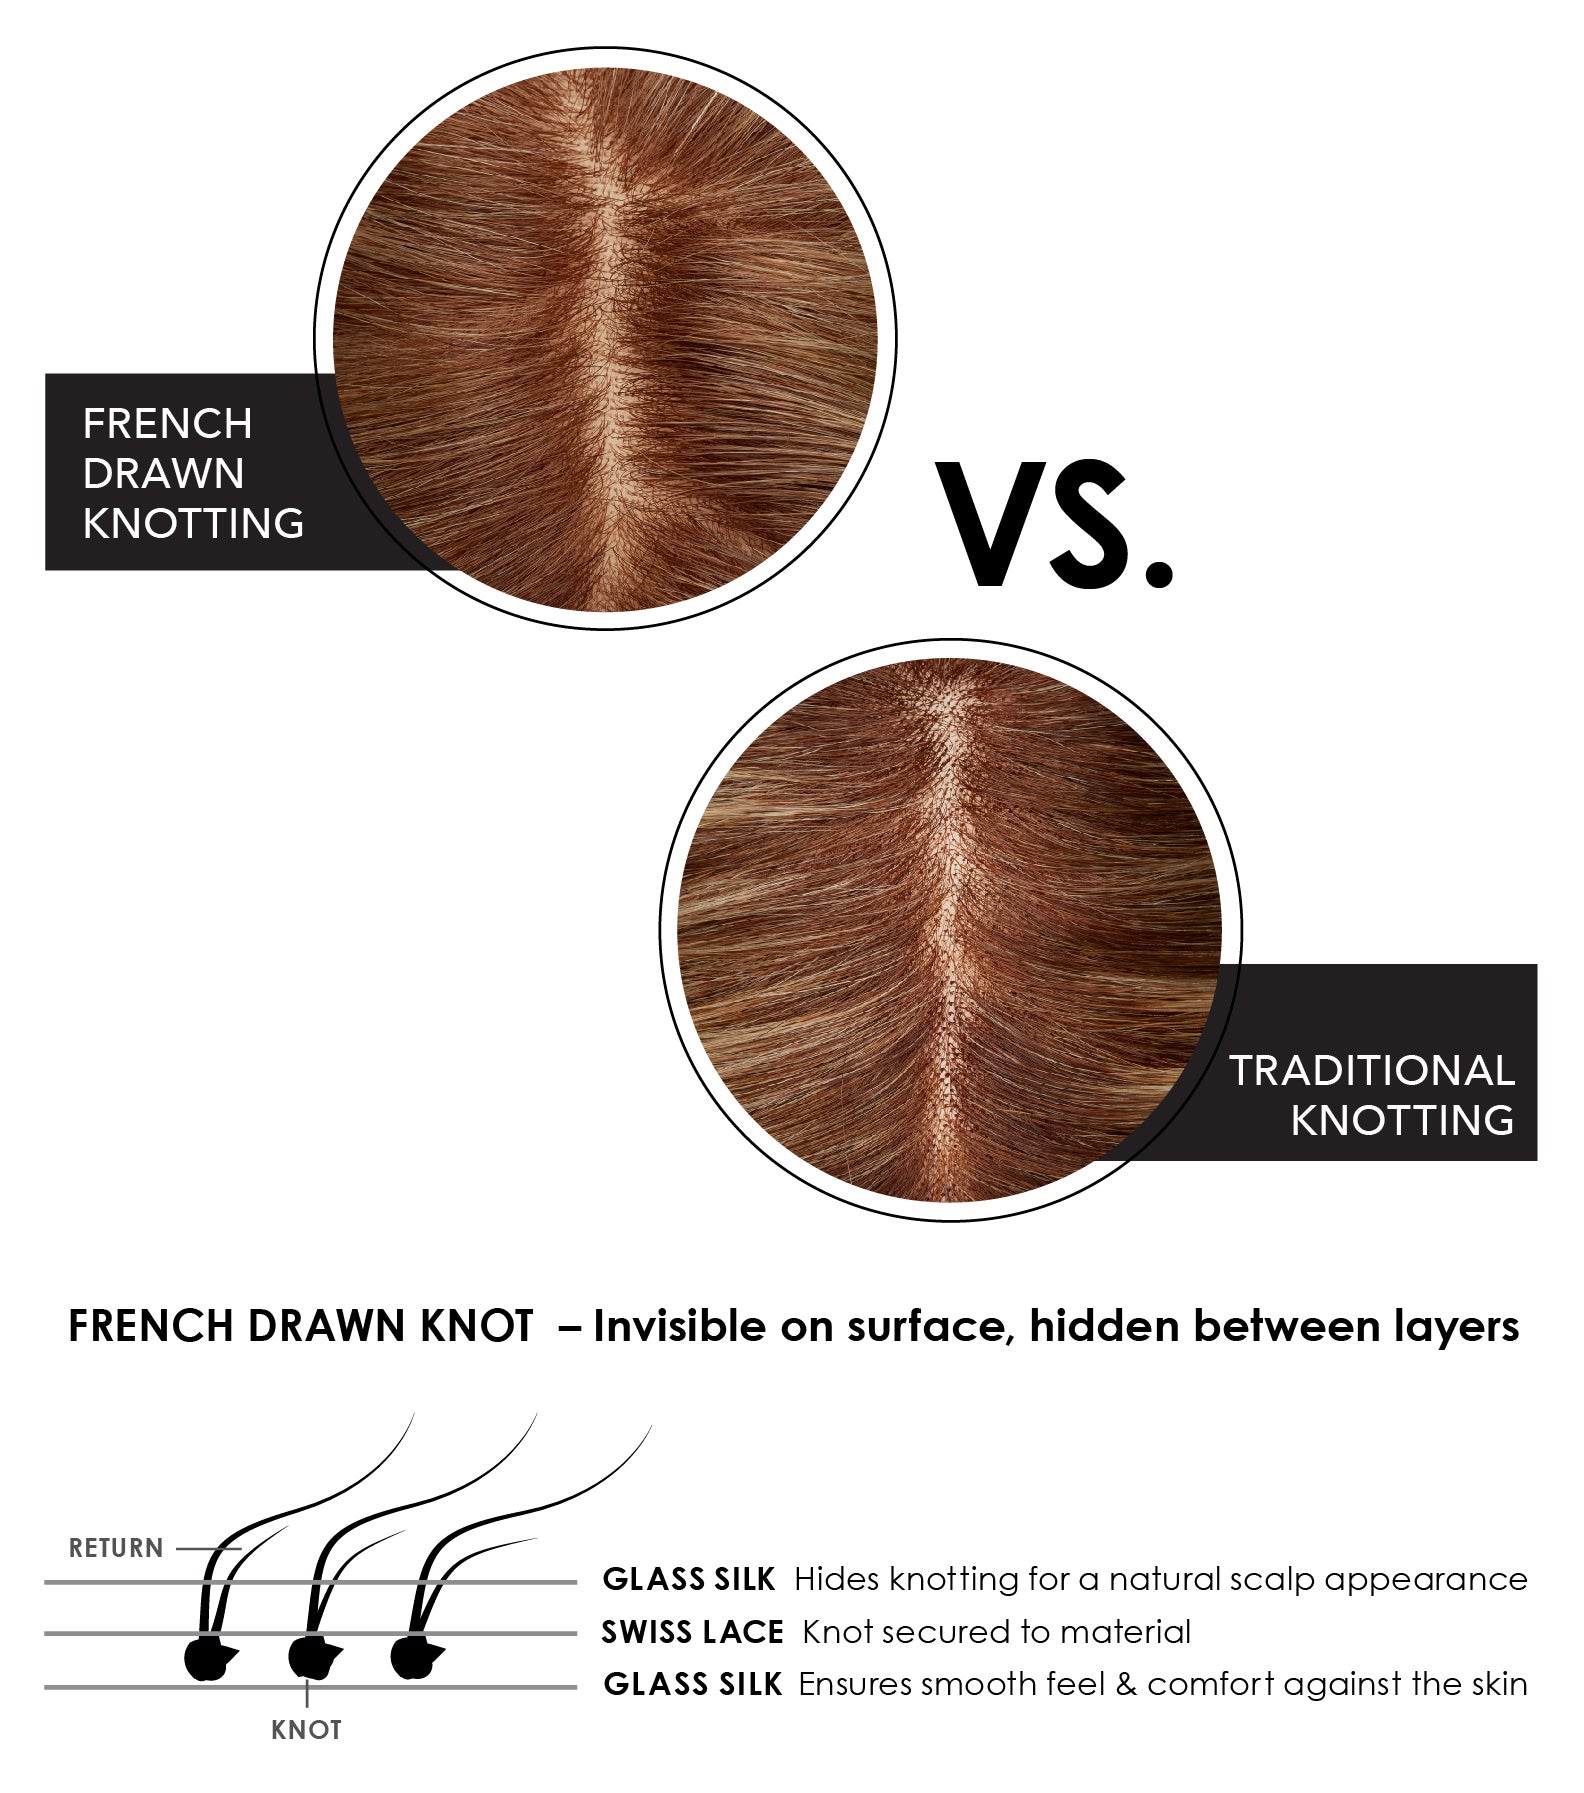 French drawn wigs and hair toppers